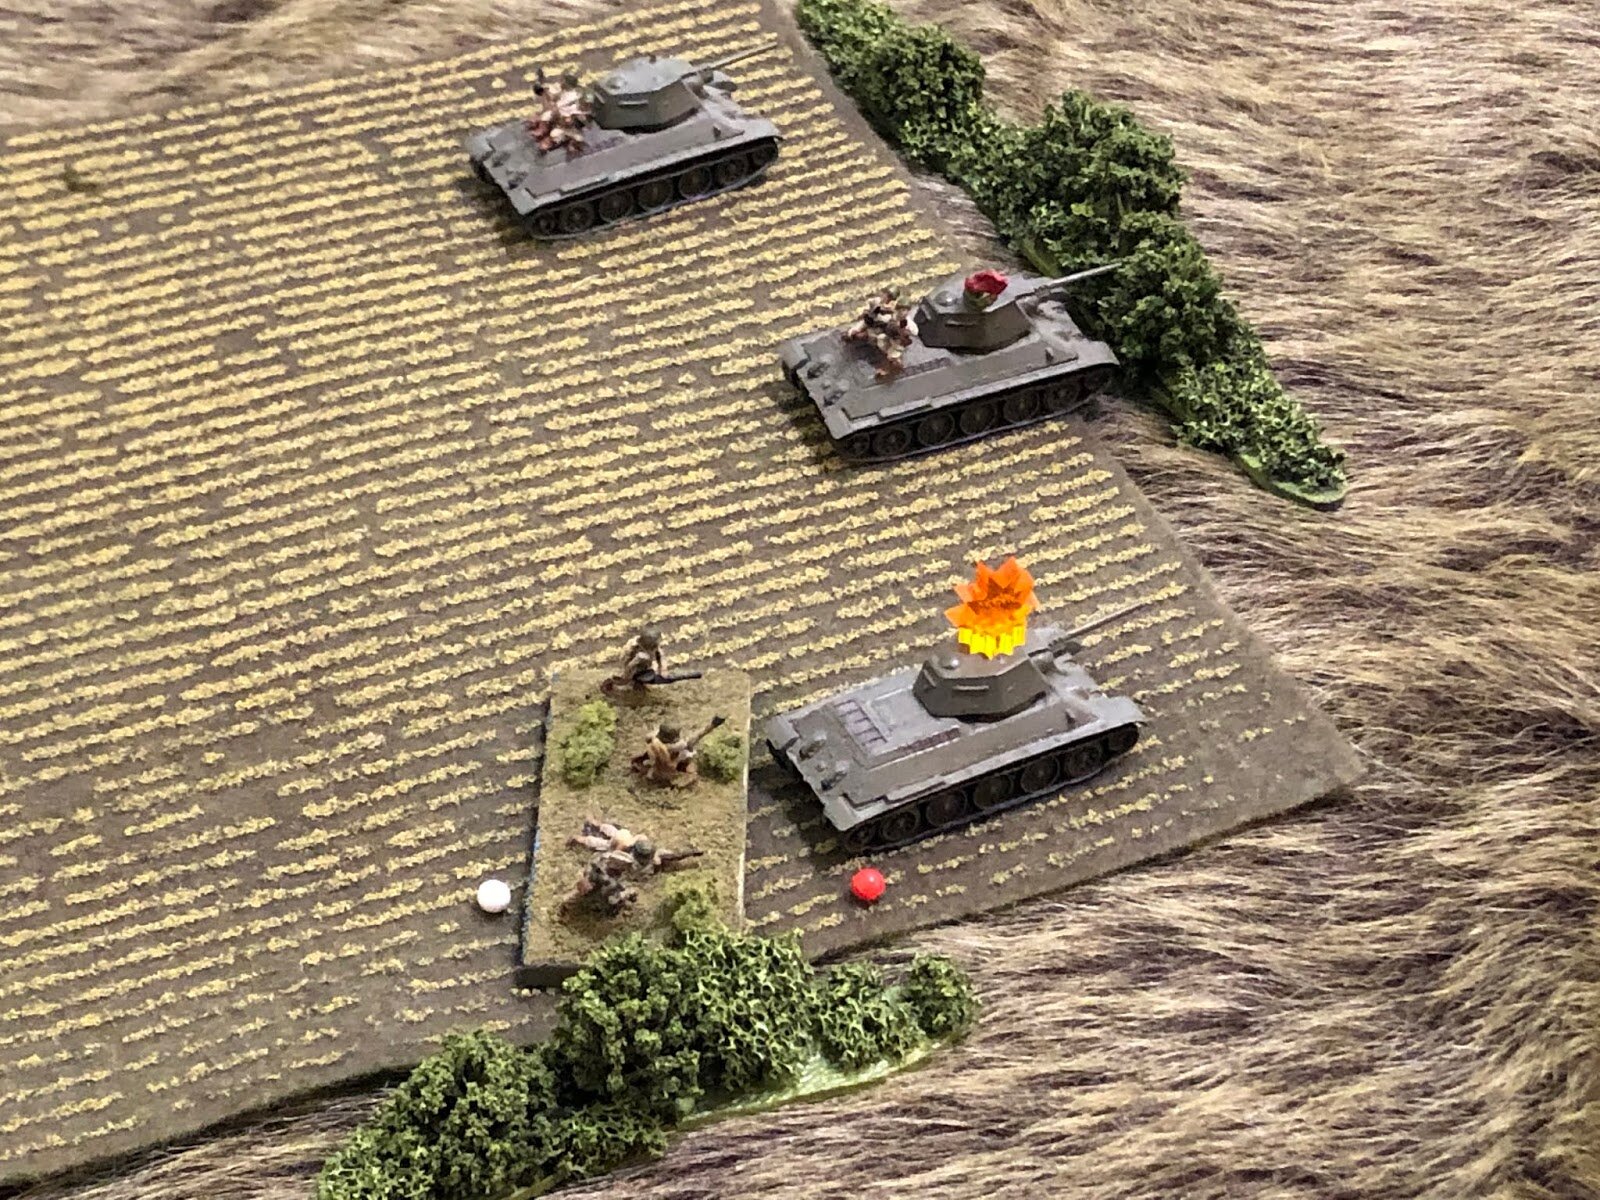  SHPLANGGG!!! The German round ricochets off the T-34, suppressing the crew and knocking off the tank riders, with casualties! The crew works on getting their stuff back together... 